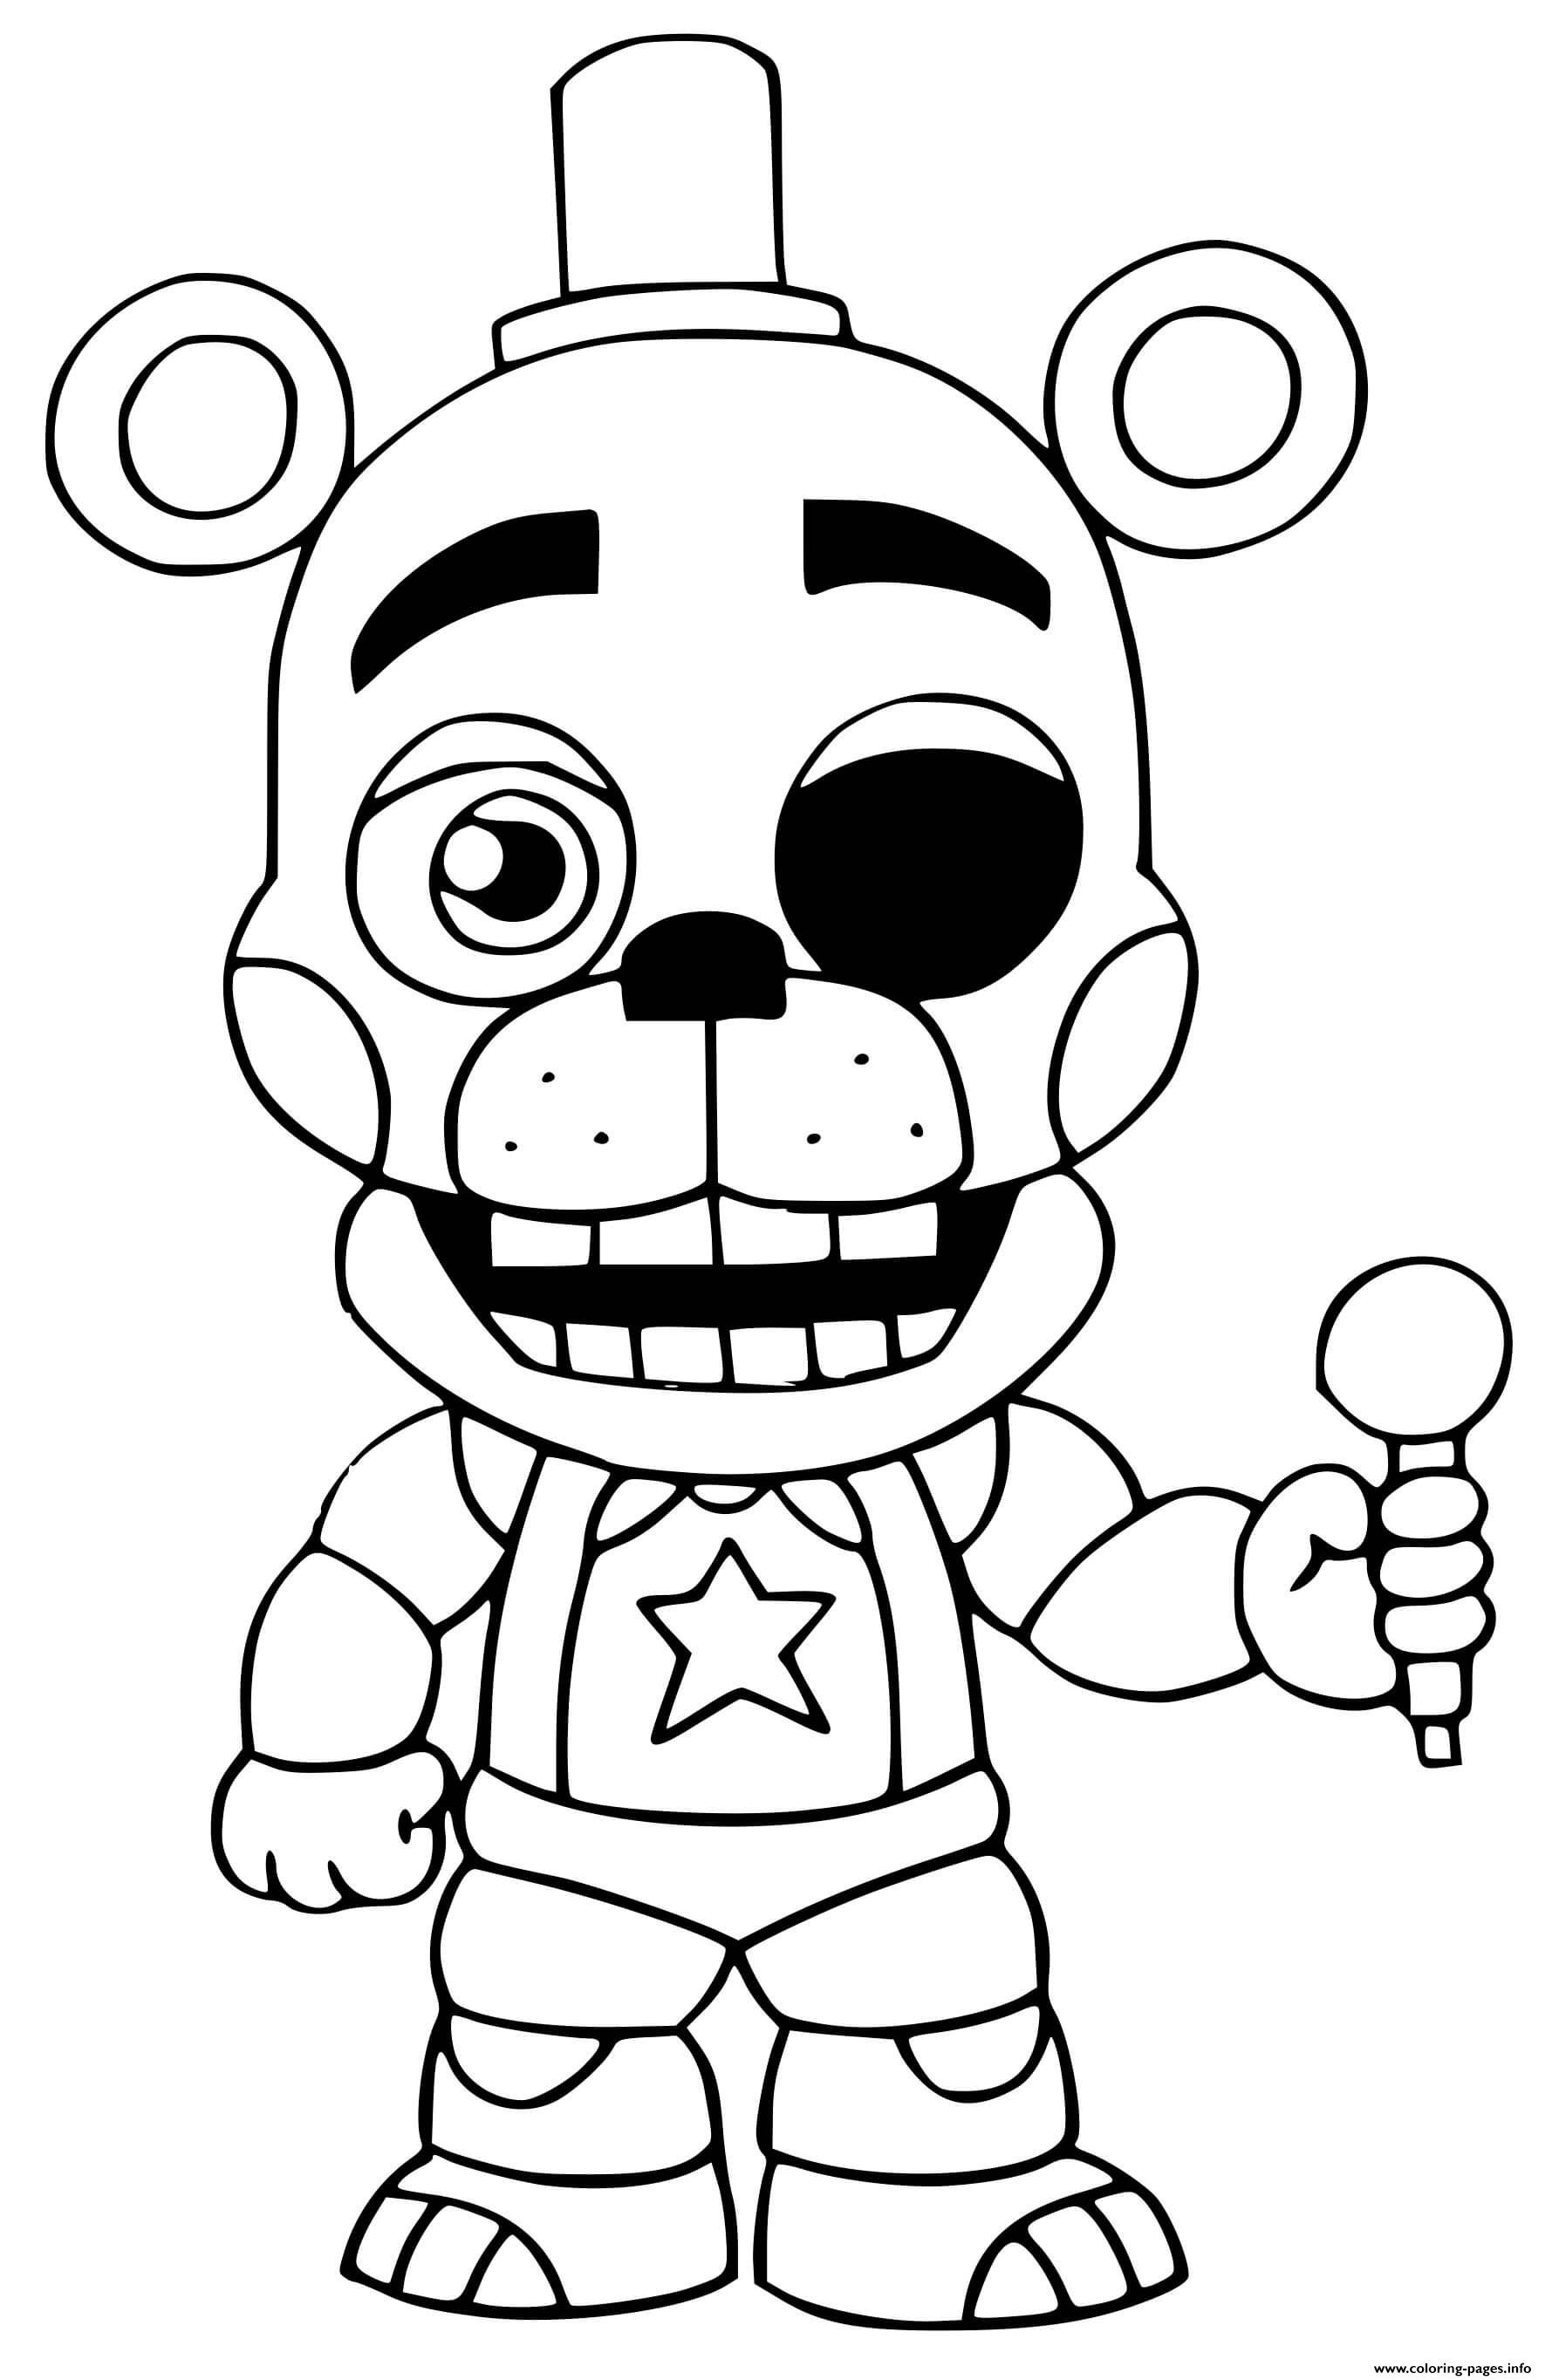 Lefty coloring